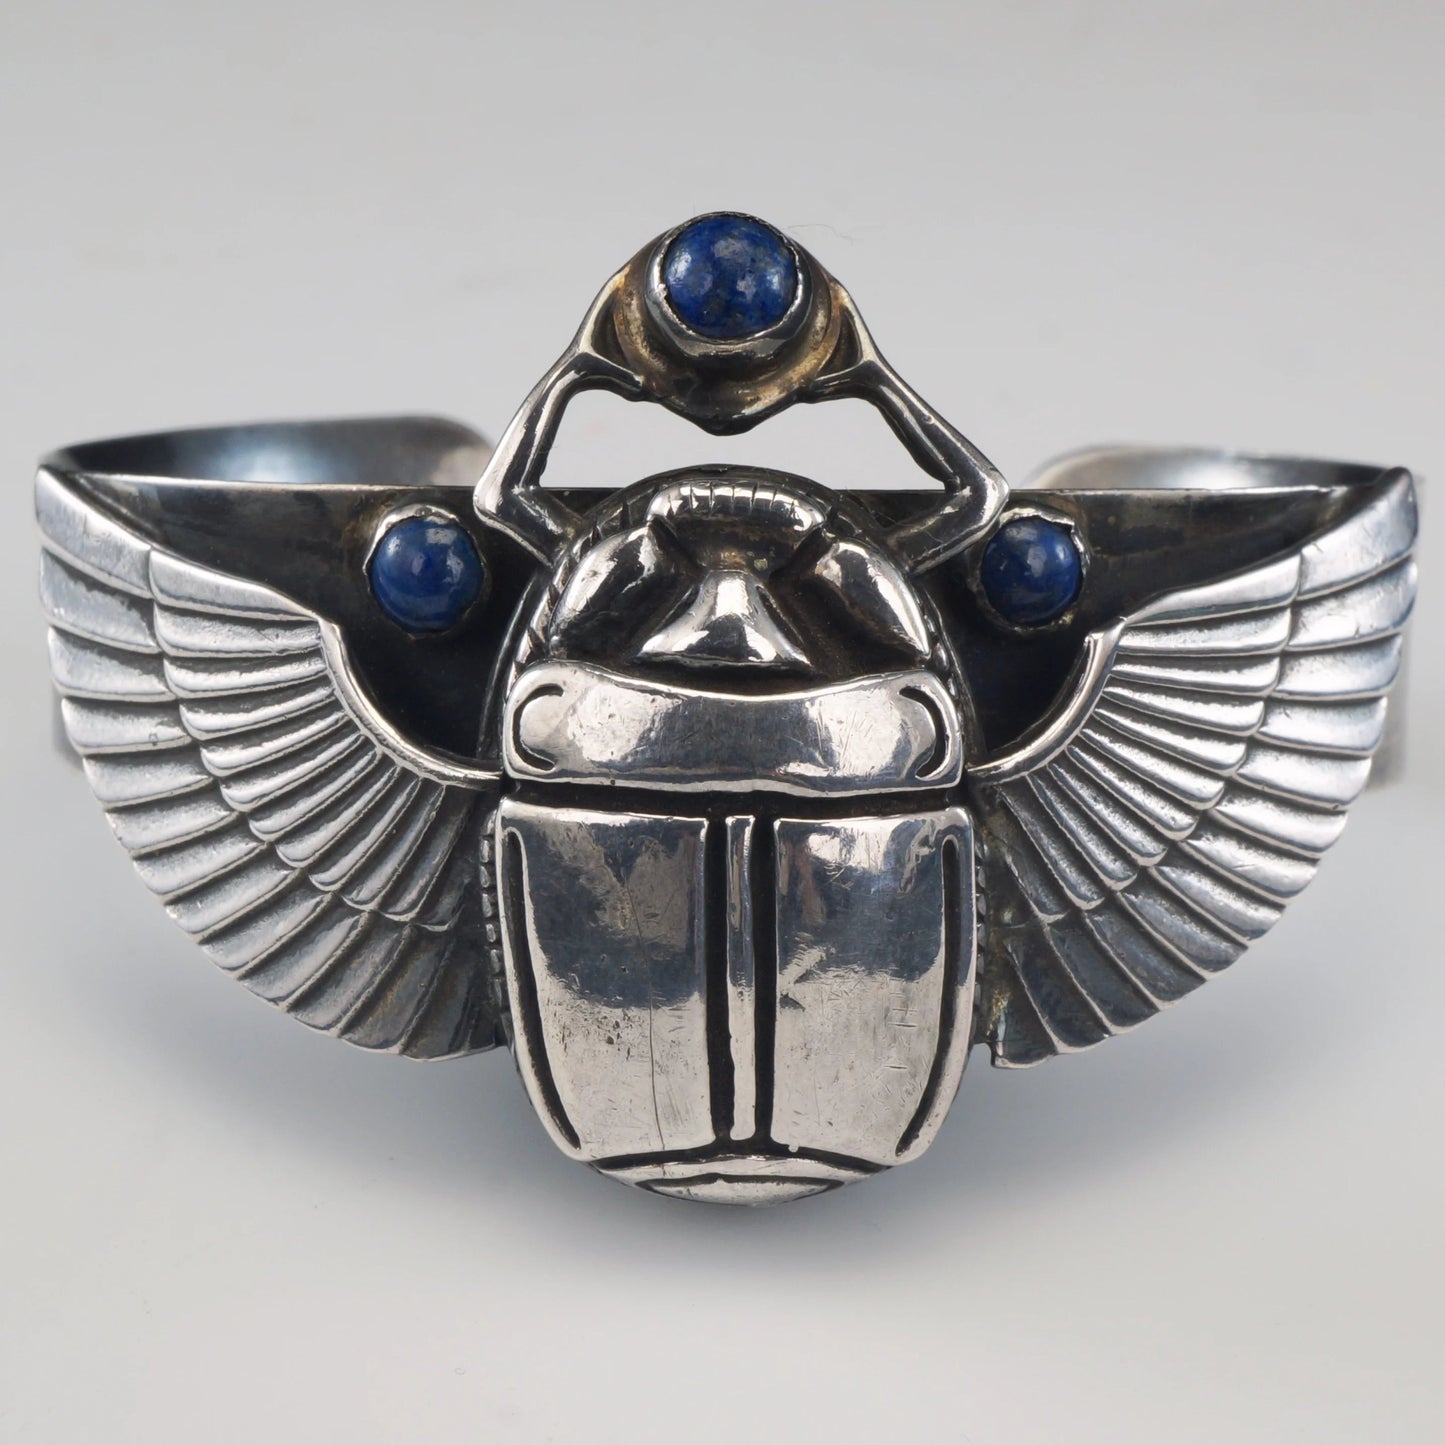 Vintage Egyptian Revival Winged Scarab Unisex 800 Silver Cuff Bracelet 1977 - Bear and Raven Antiques